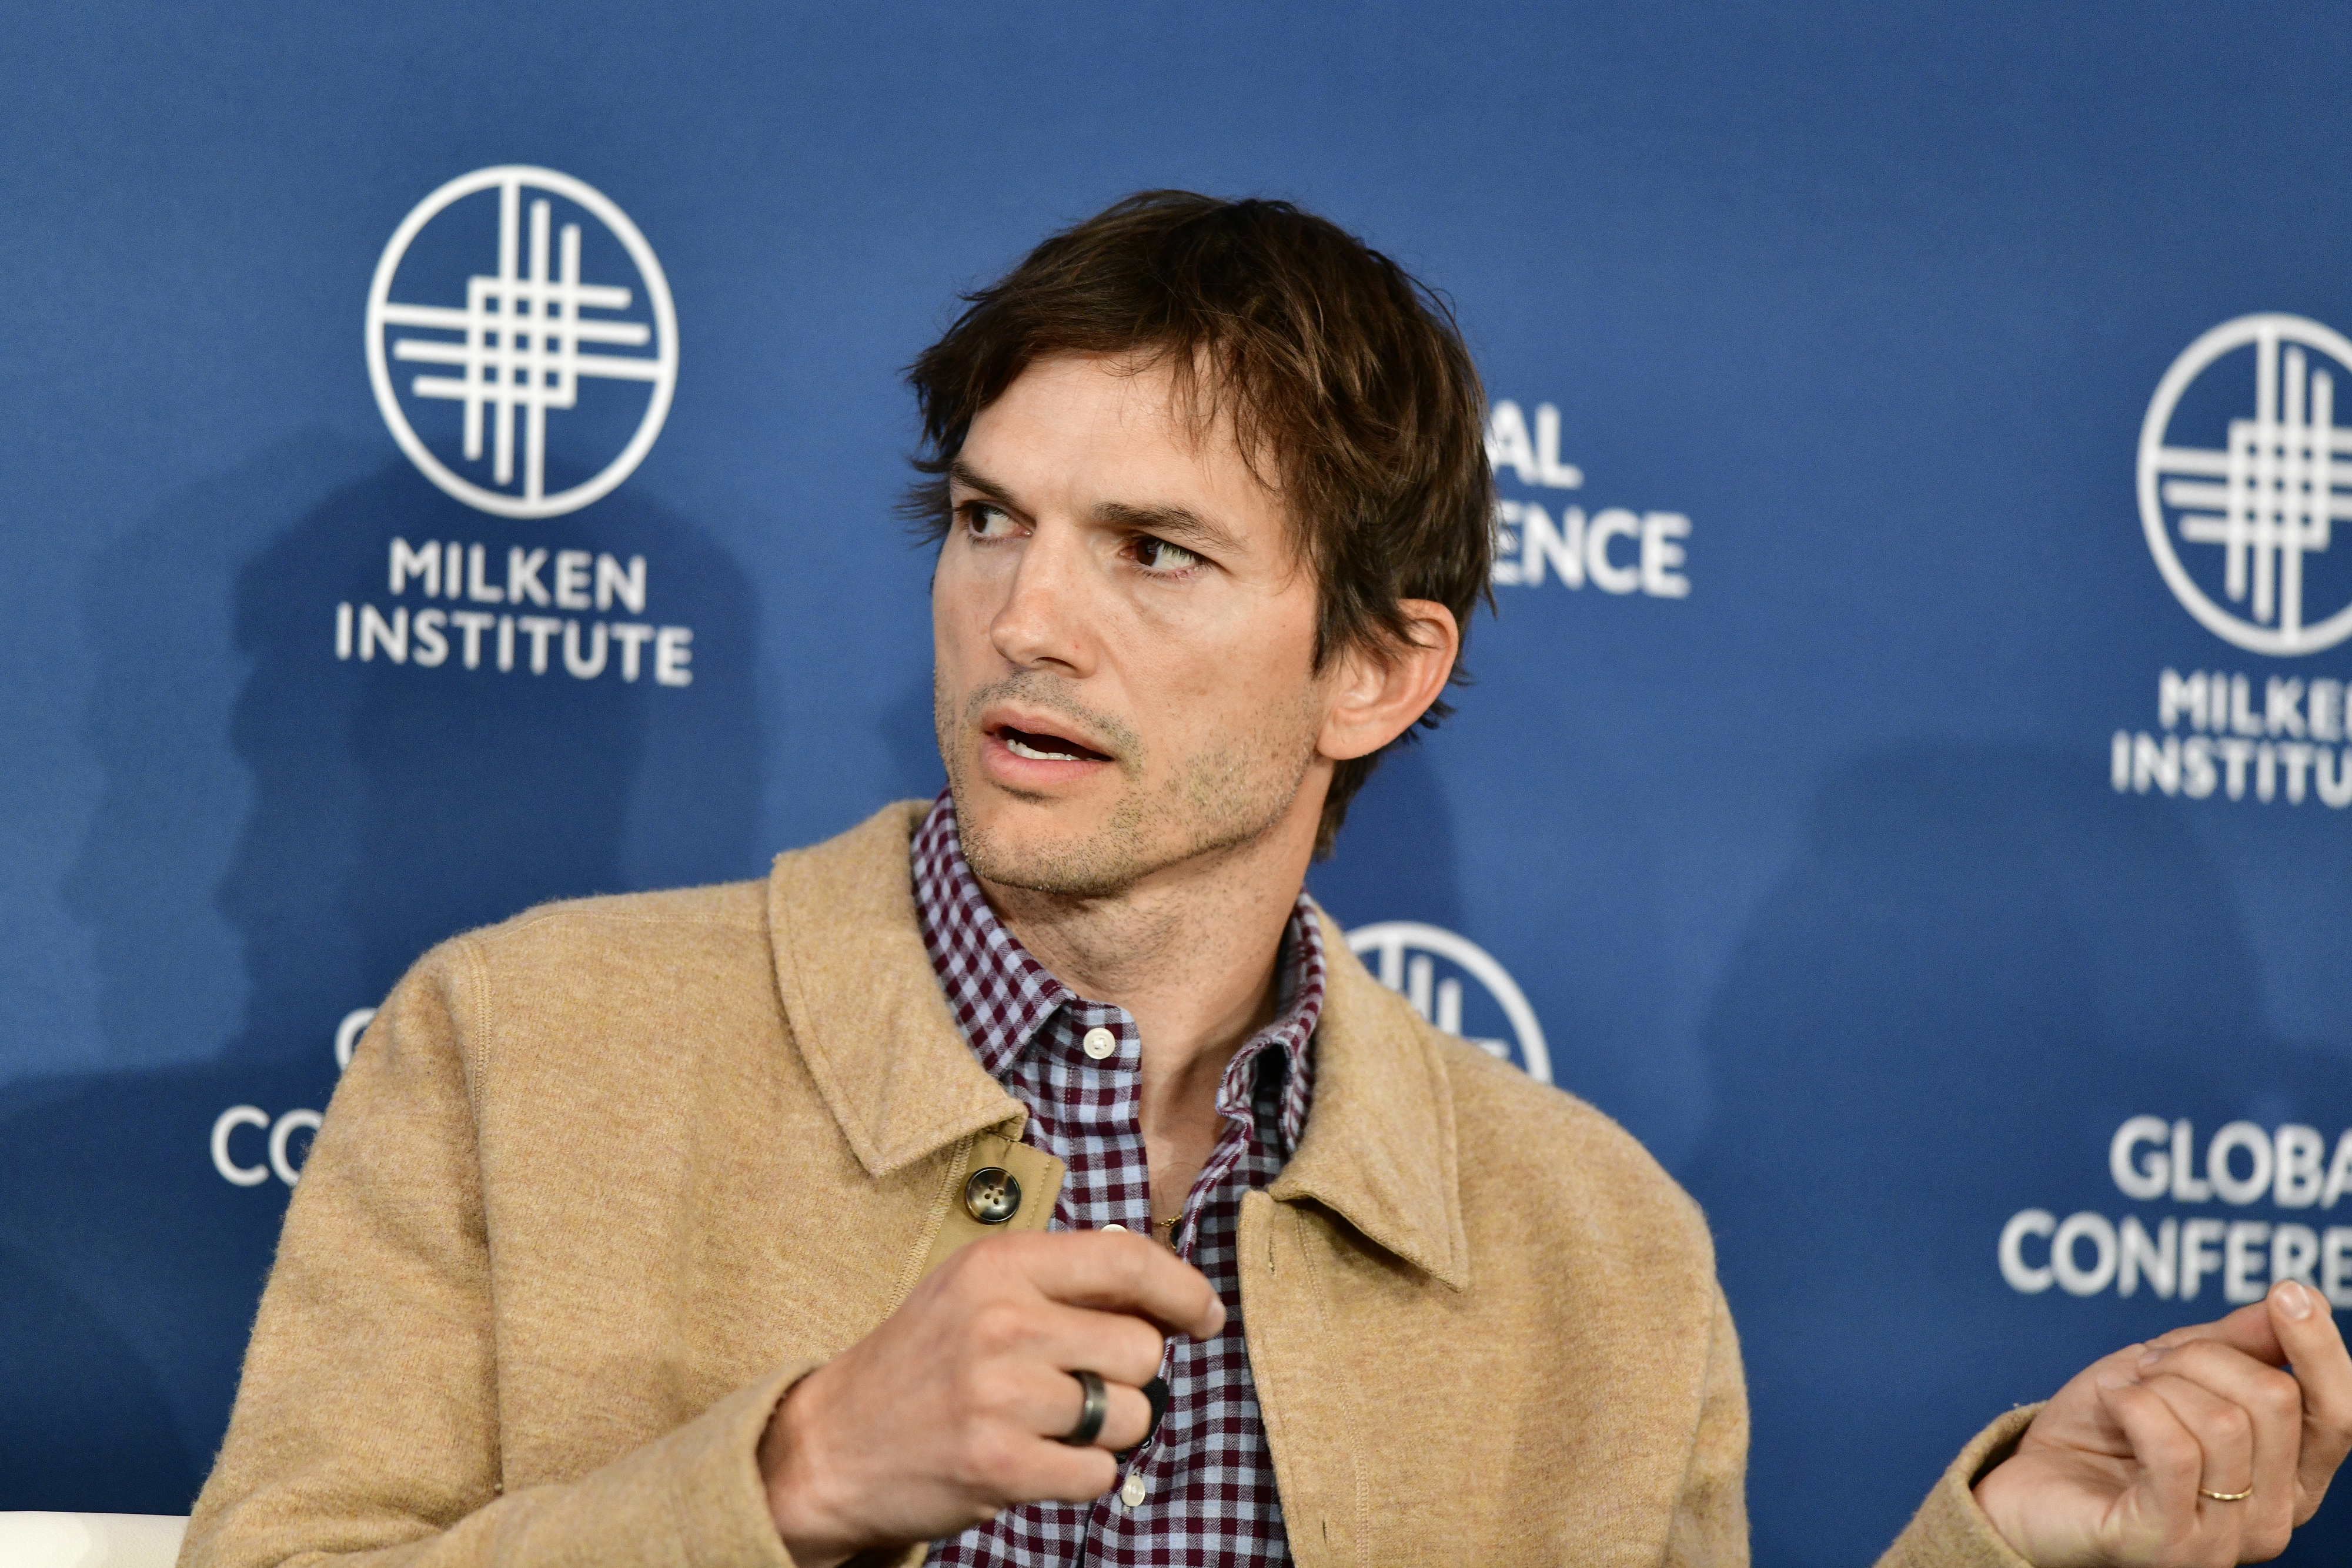 Ashton Kutcher speaks at the Milken Institute Global Conference, wearing a beige jacket over a checkered shirt